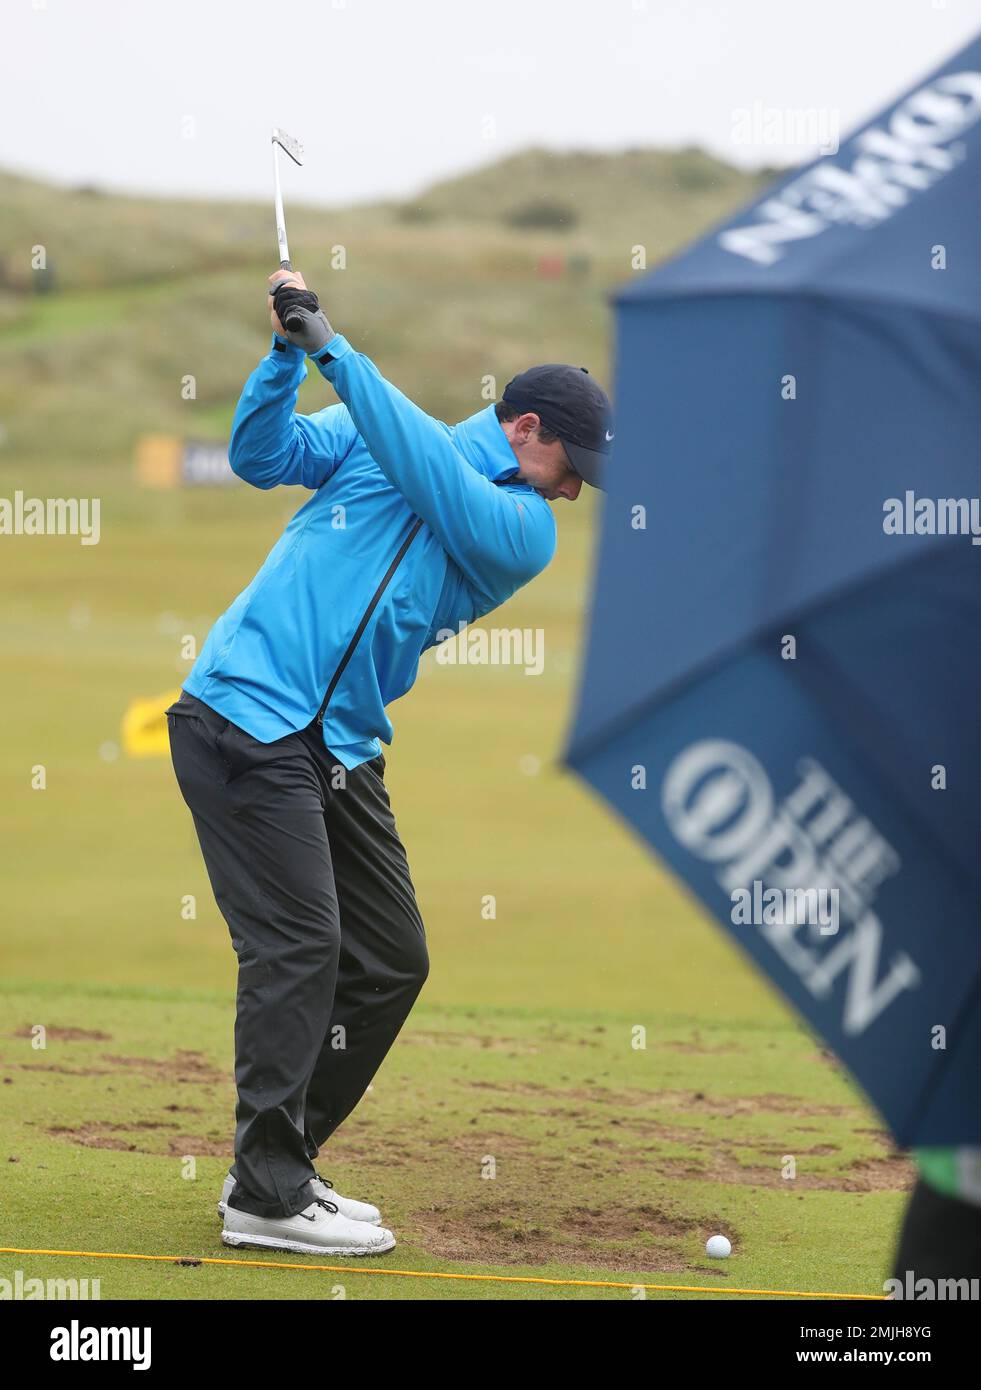 Northern Ireland's Rory McIlroy prepares to hit a shot on the practice  range ahead of the start of the British Open golf championships at Royal  Portrush in Northern Ireland, Wednesday, July 17,